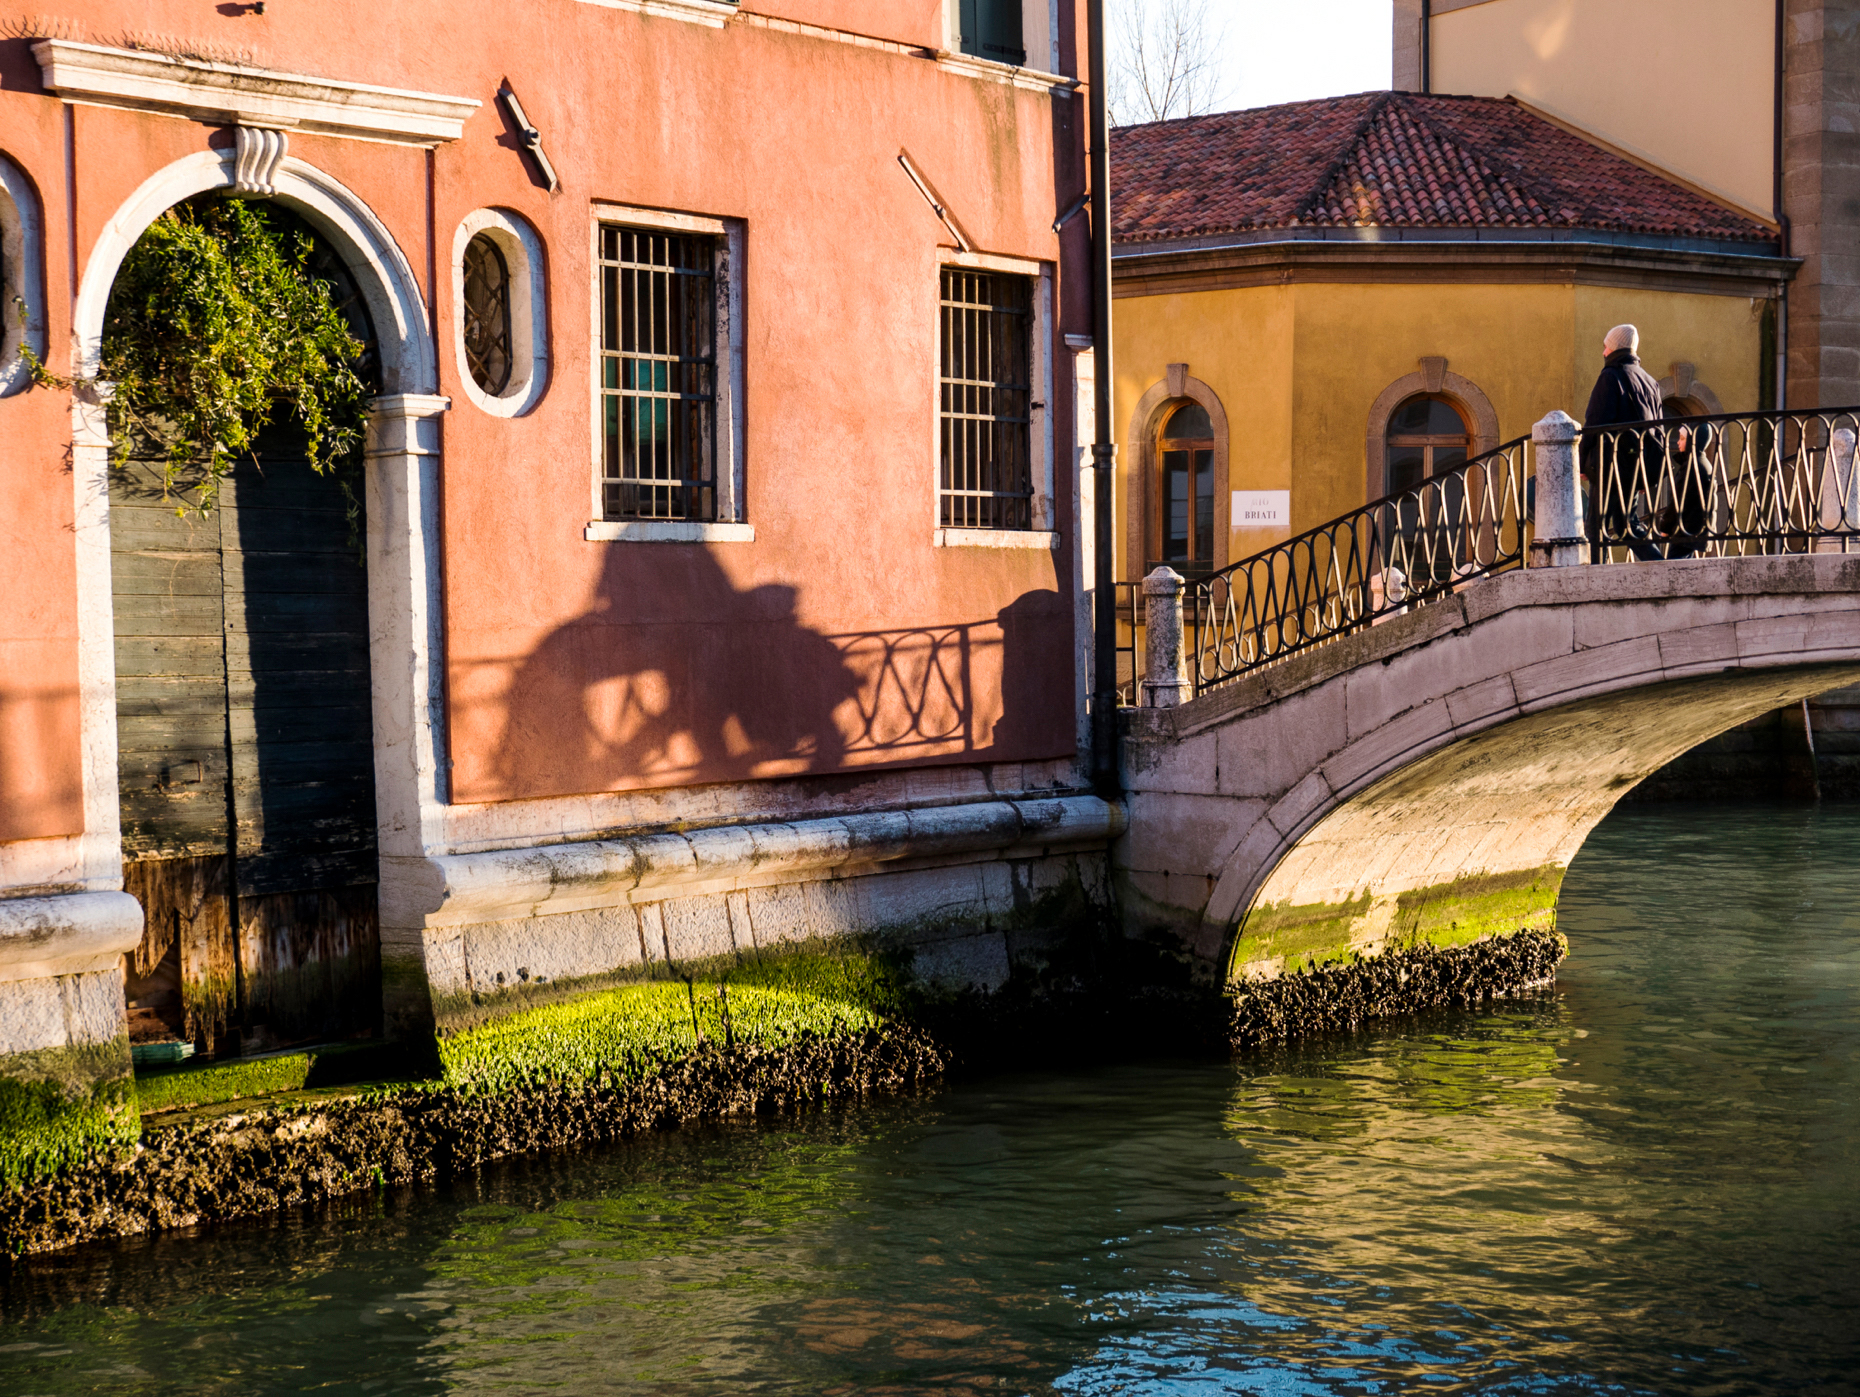 Visitors & locals enjoy Venice, Italy, the City of Canals